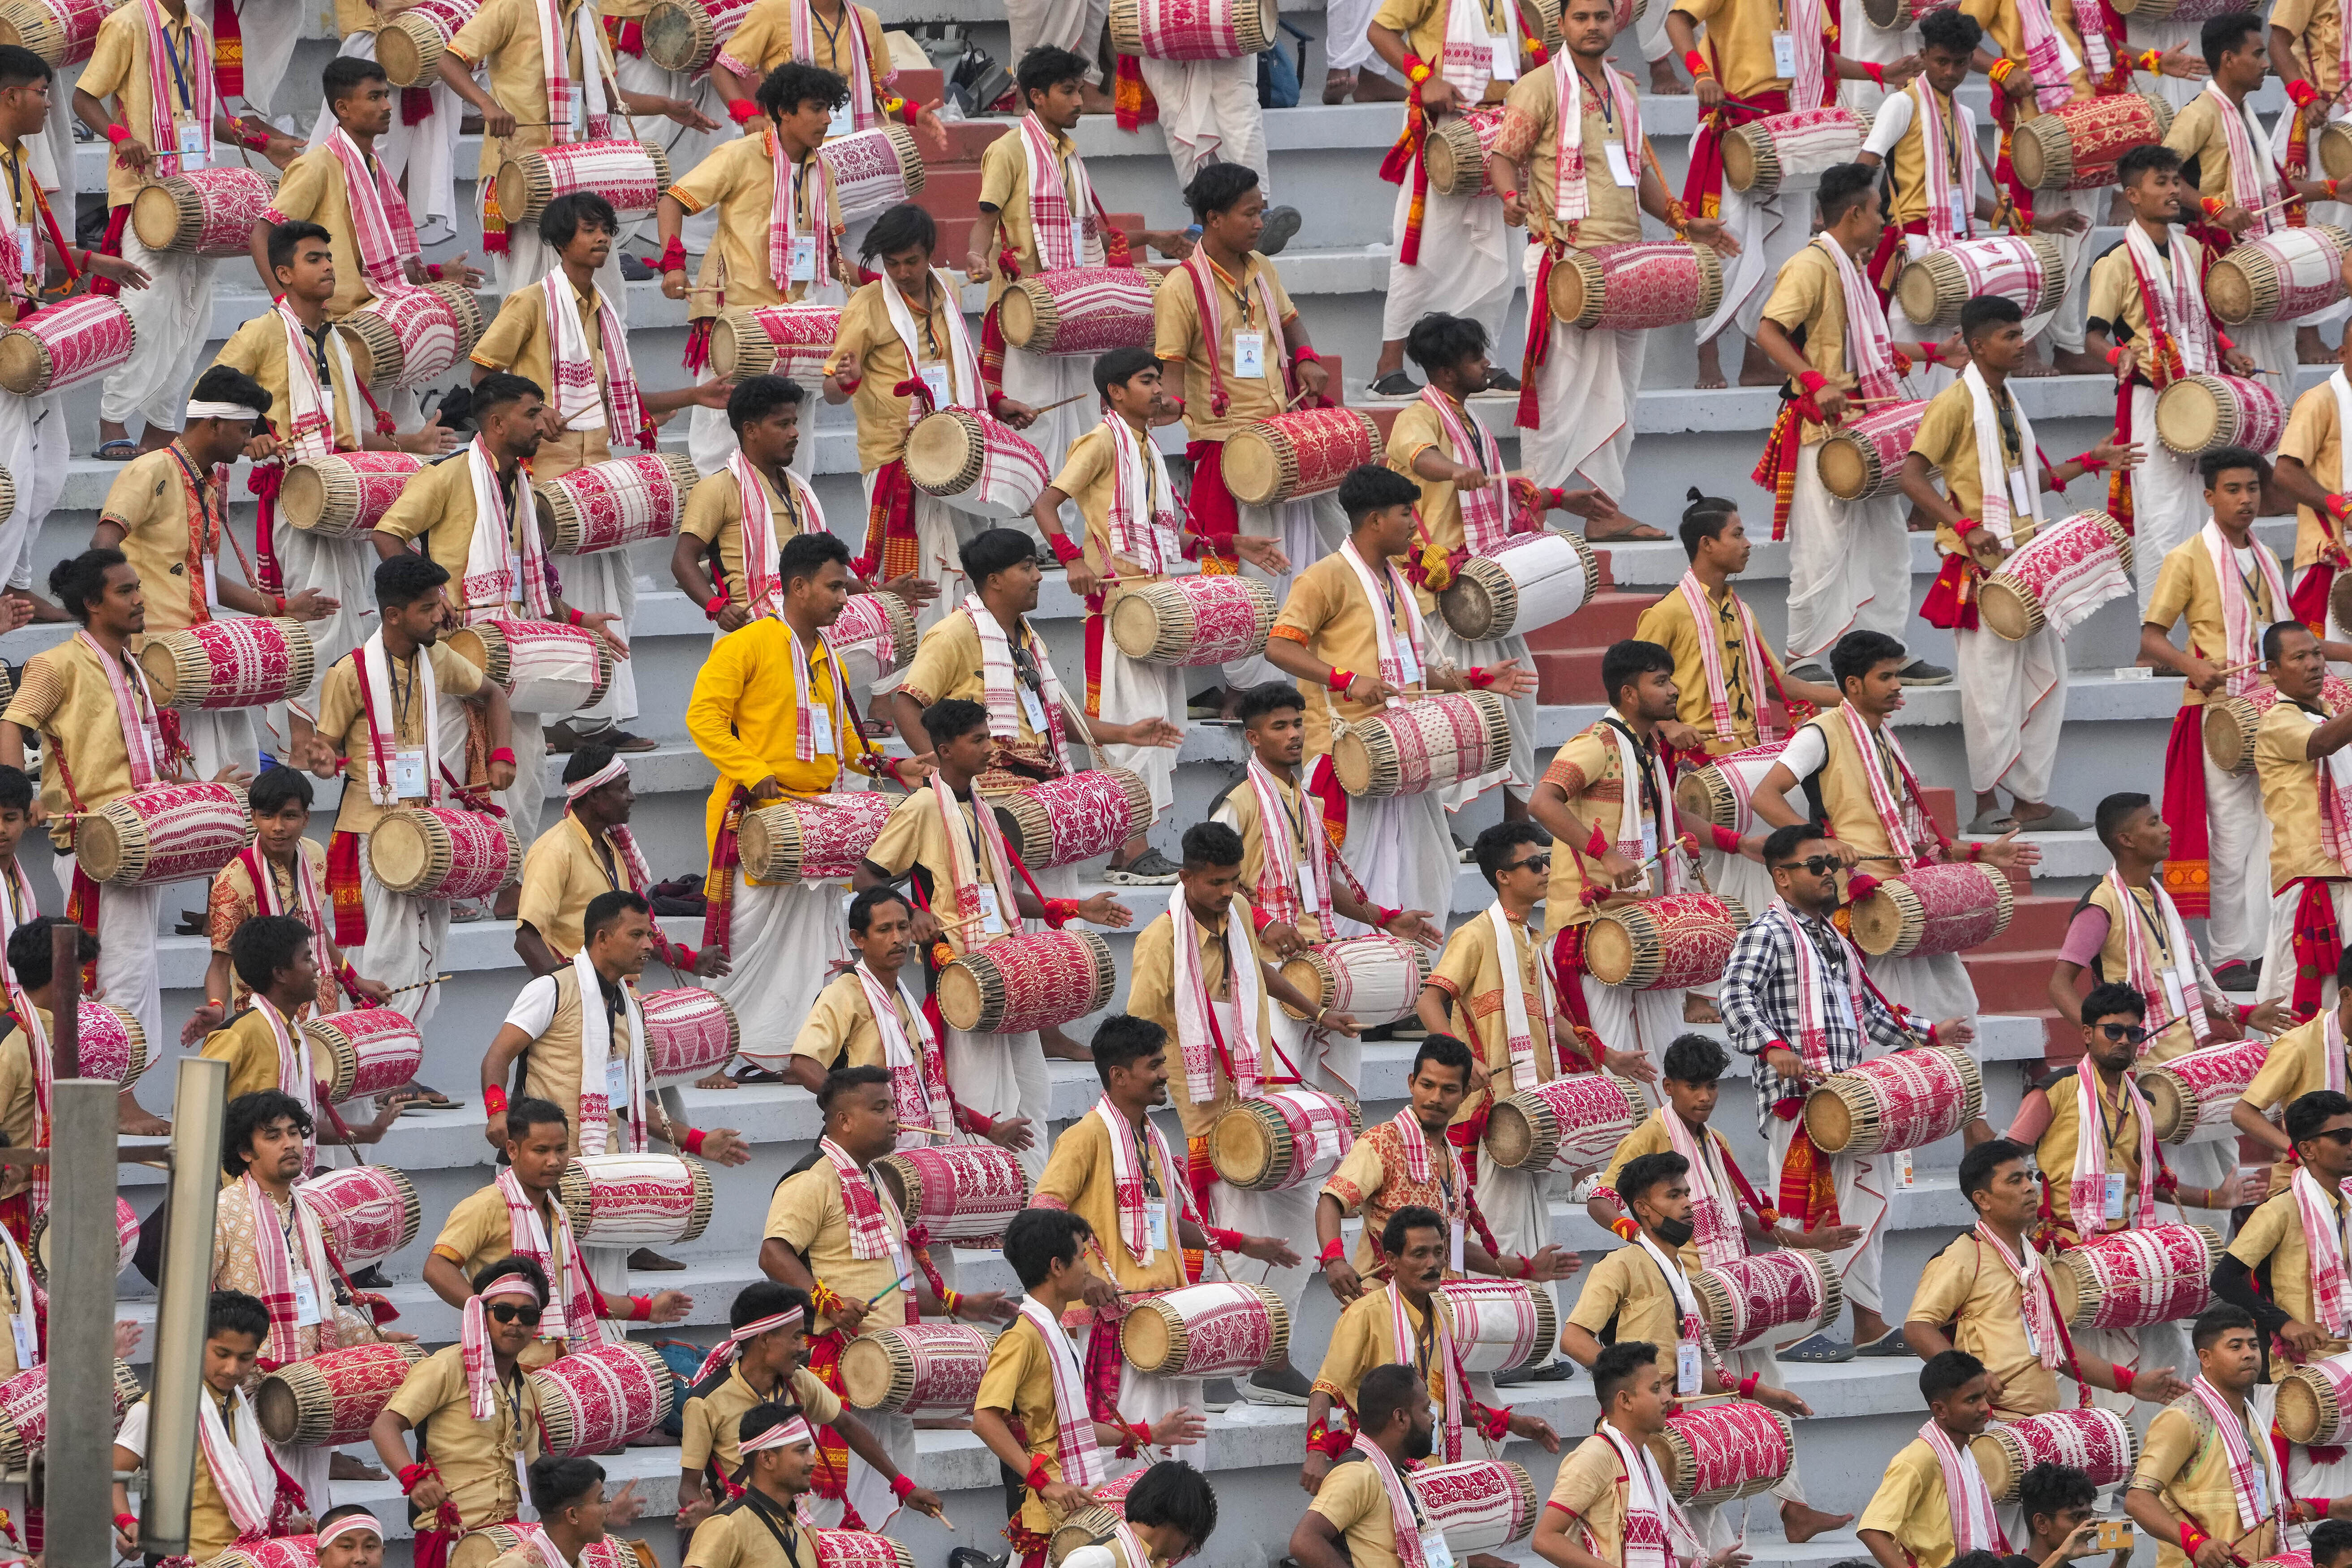 Assamese musicians in traditional attire practice playing Dhols or drums ahead of an event in Guwahati, India, Tuesday, April 11, 2023. Around 11,000 Bihu dancers and musicians will perform together for Guinness World Record in the largest folk dance performance category on April 14. (AP Photo/Anupam Nath)

Associated Press/LaPresse
Only Italy and Spain